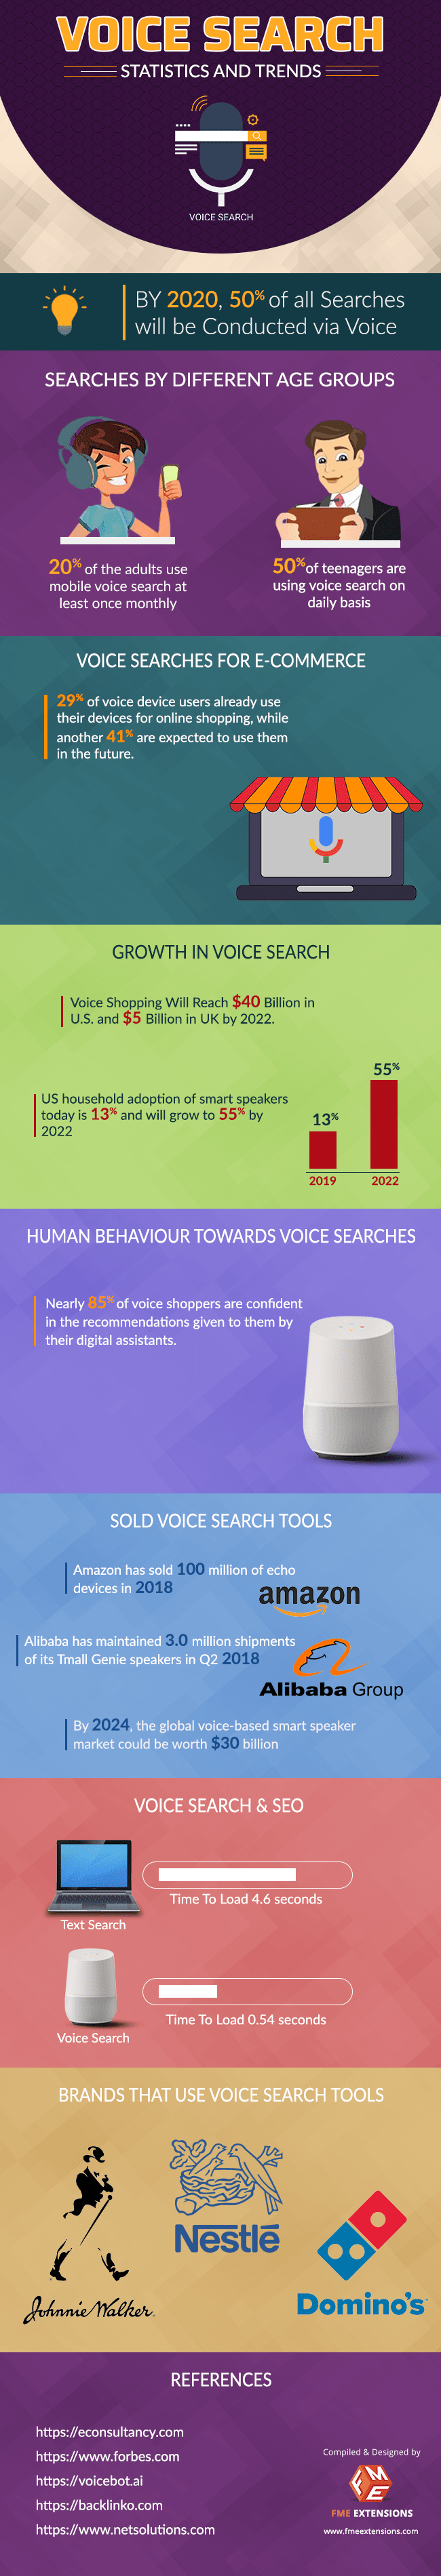 Voice-Search-Statistics-and-Trends